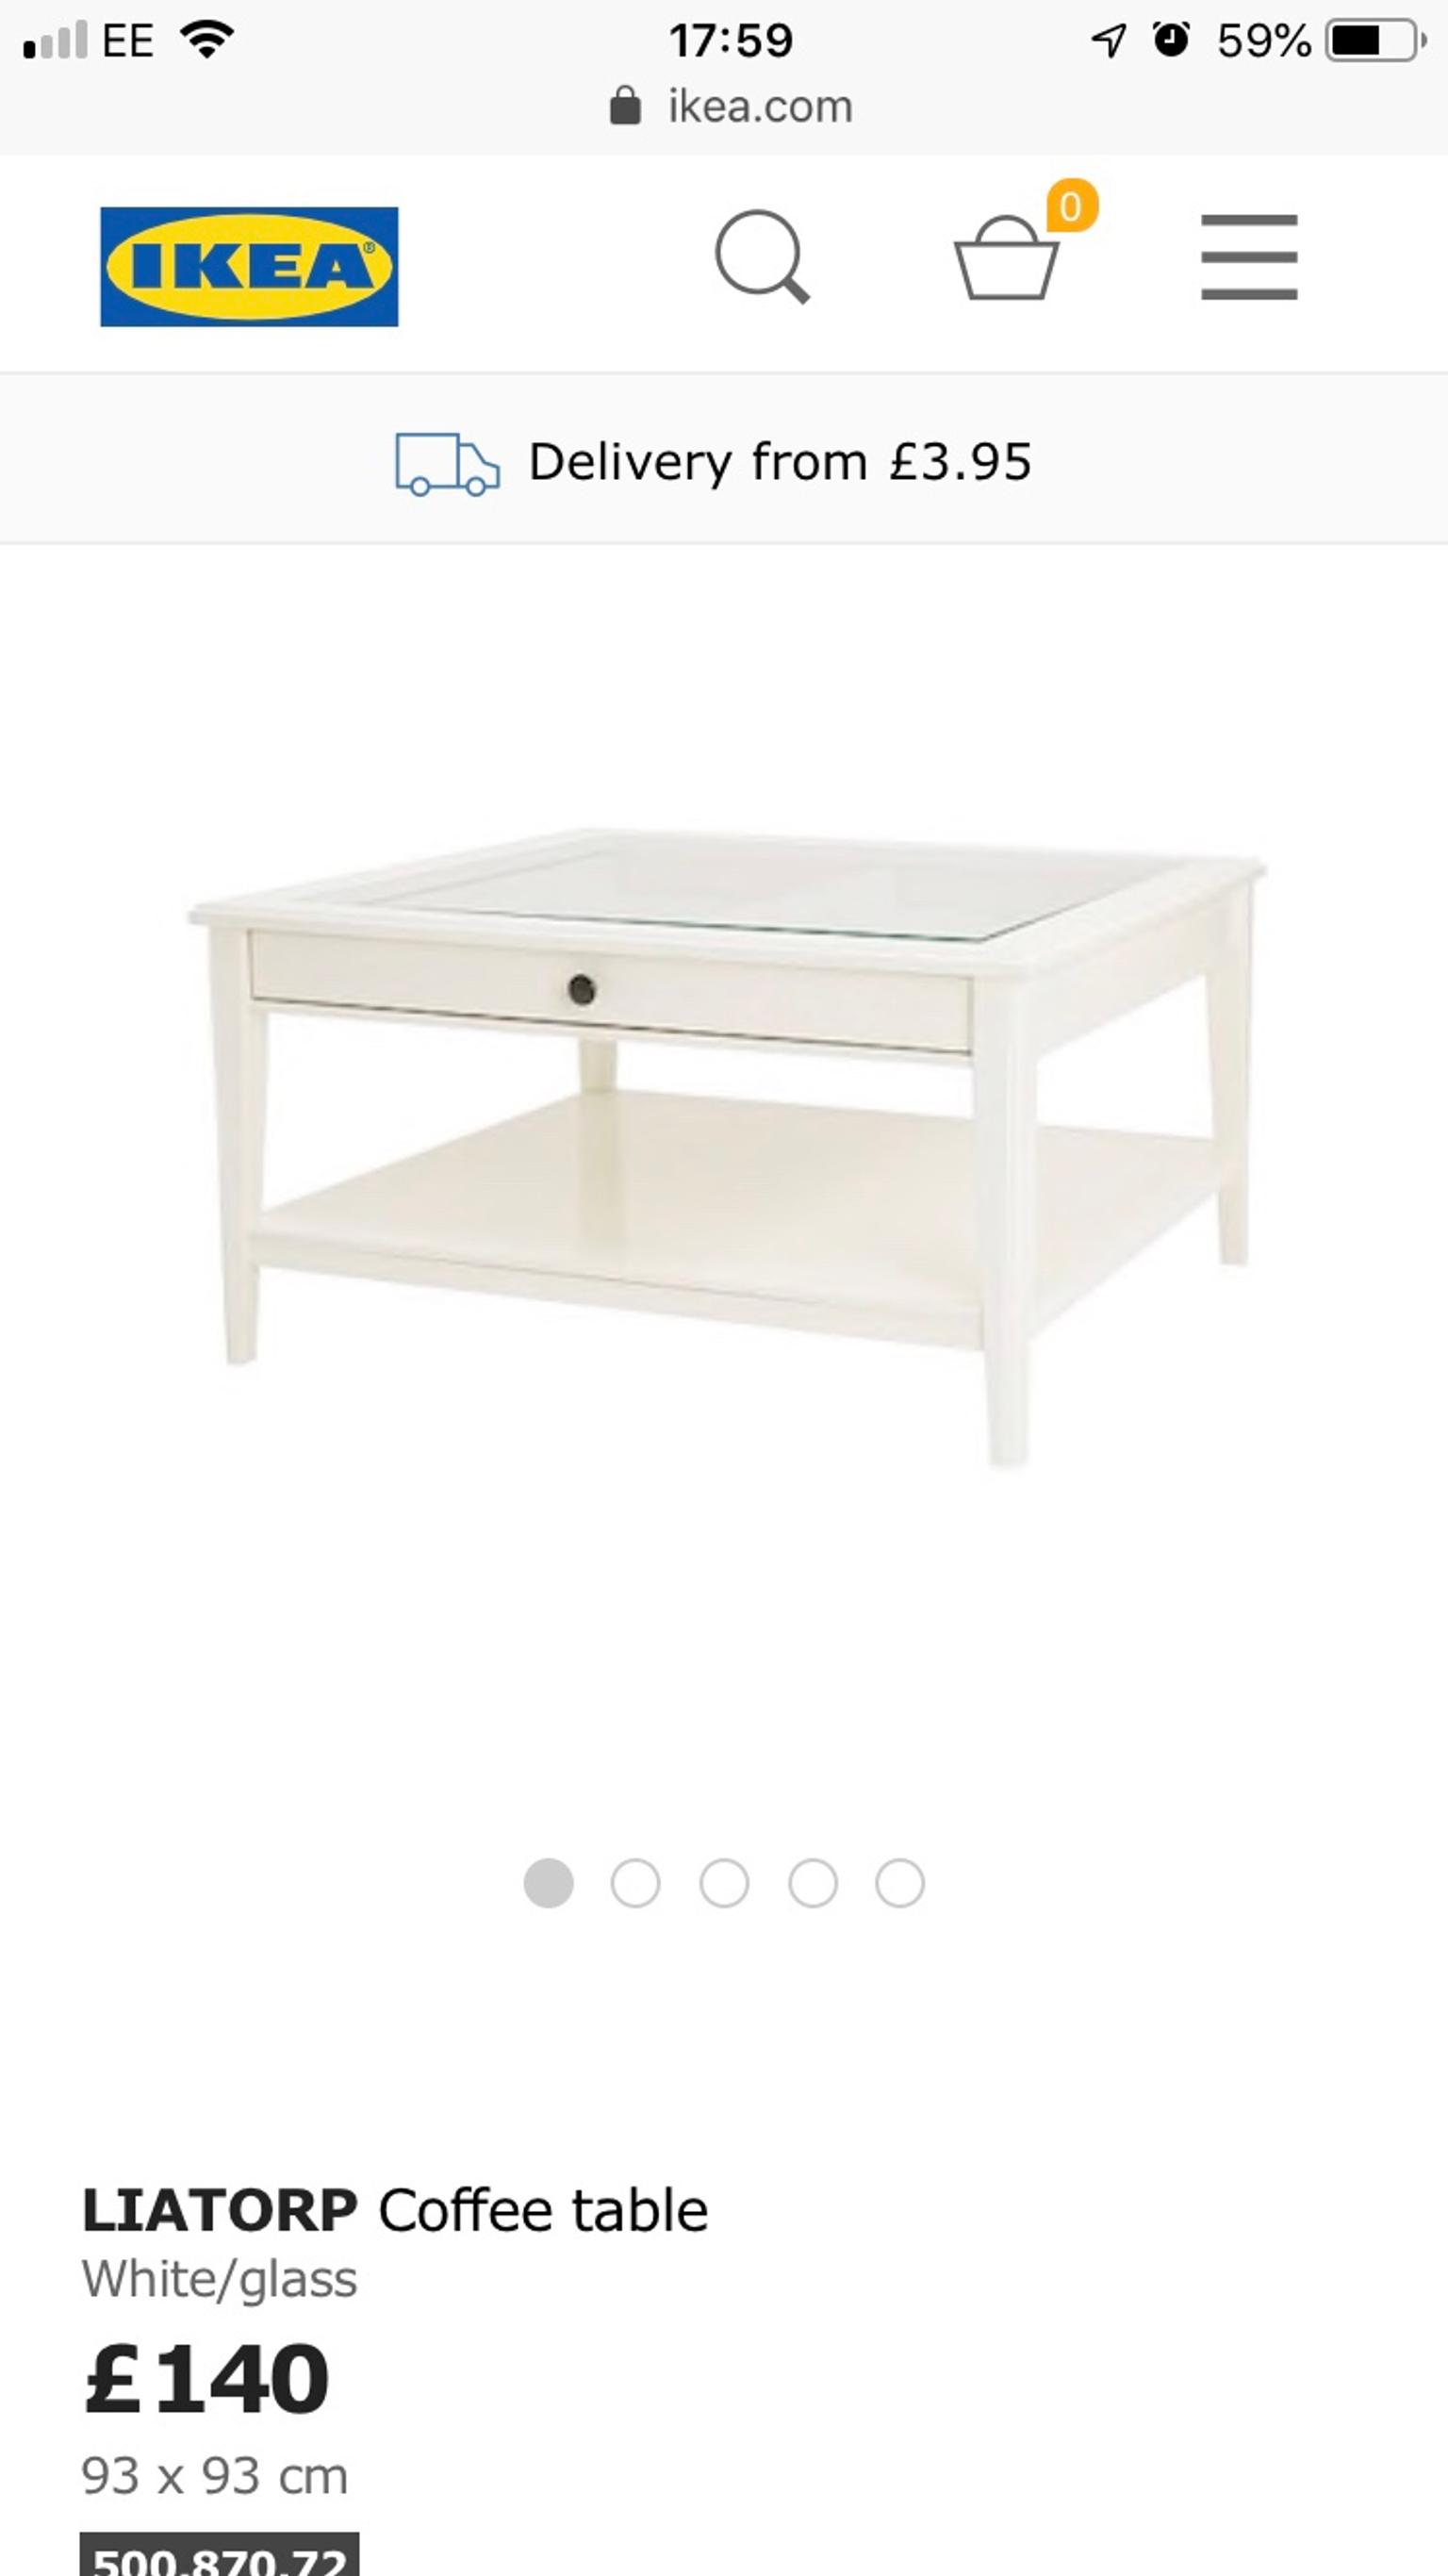 Ikea Liatorp Coffee Table 93x93 In Sl4 Windsor For 70 00 For Sale